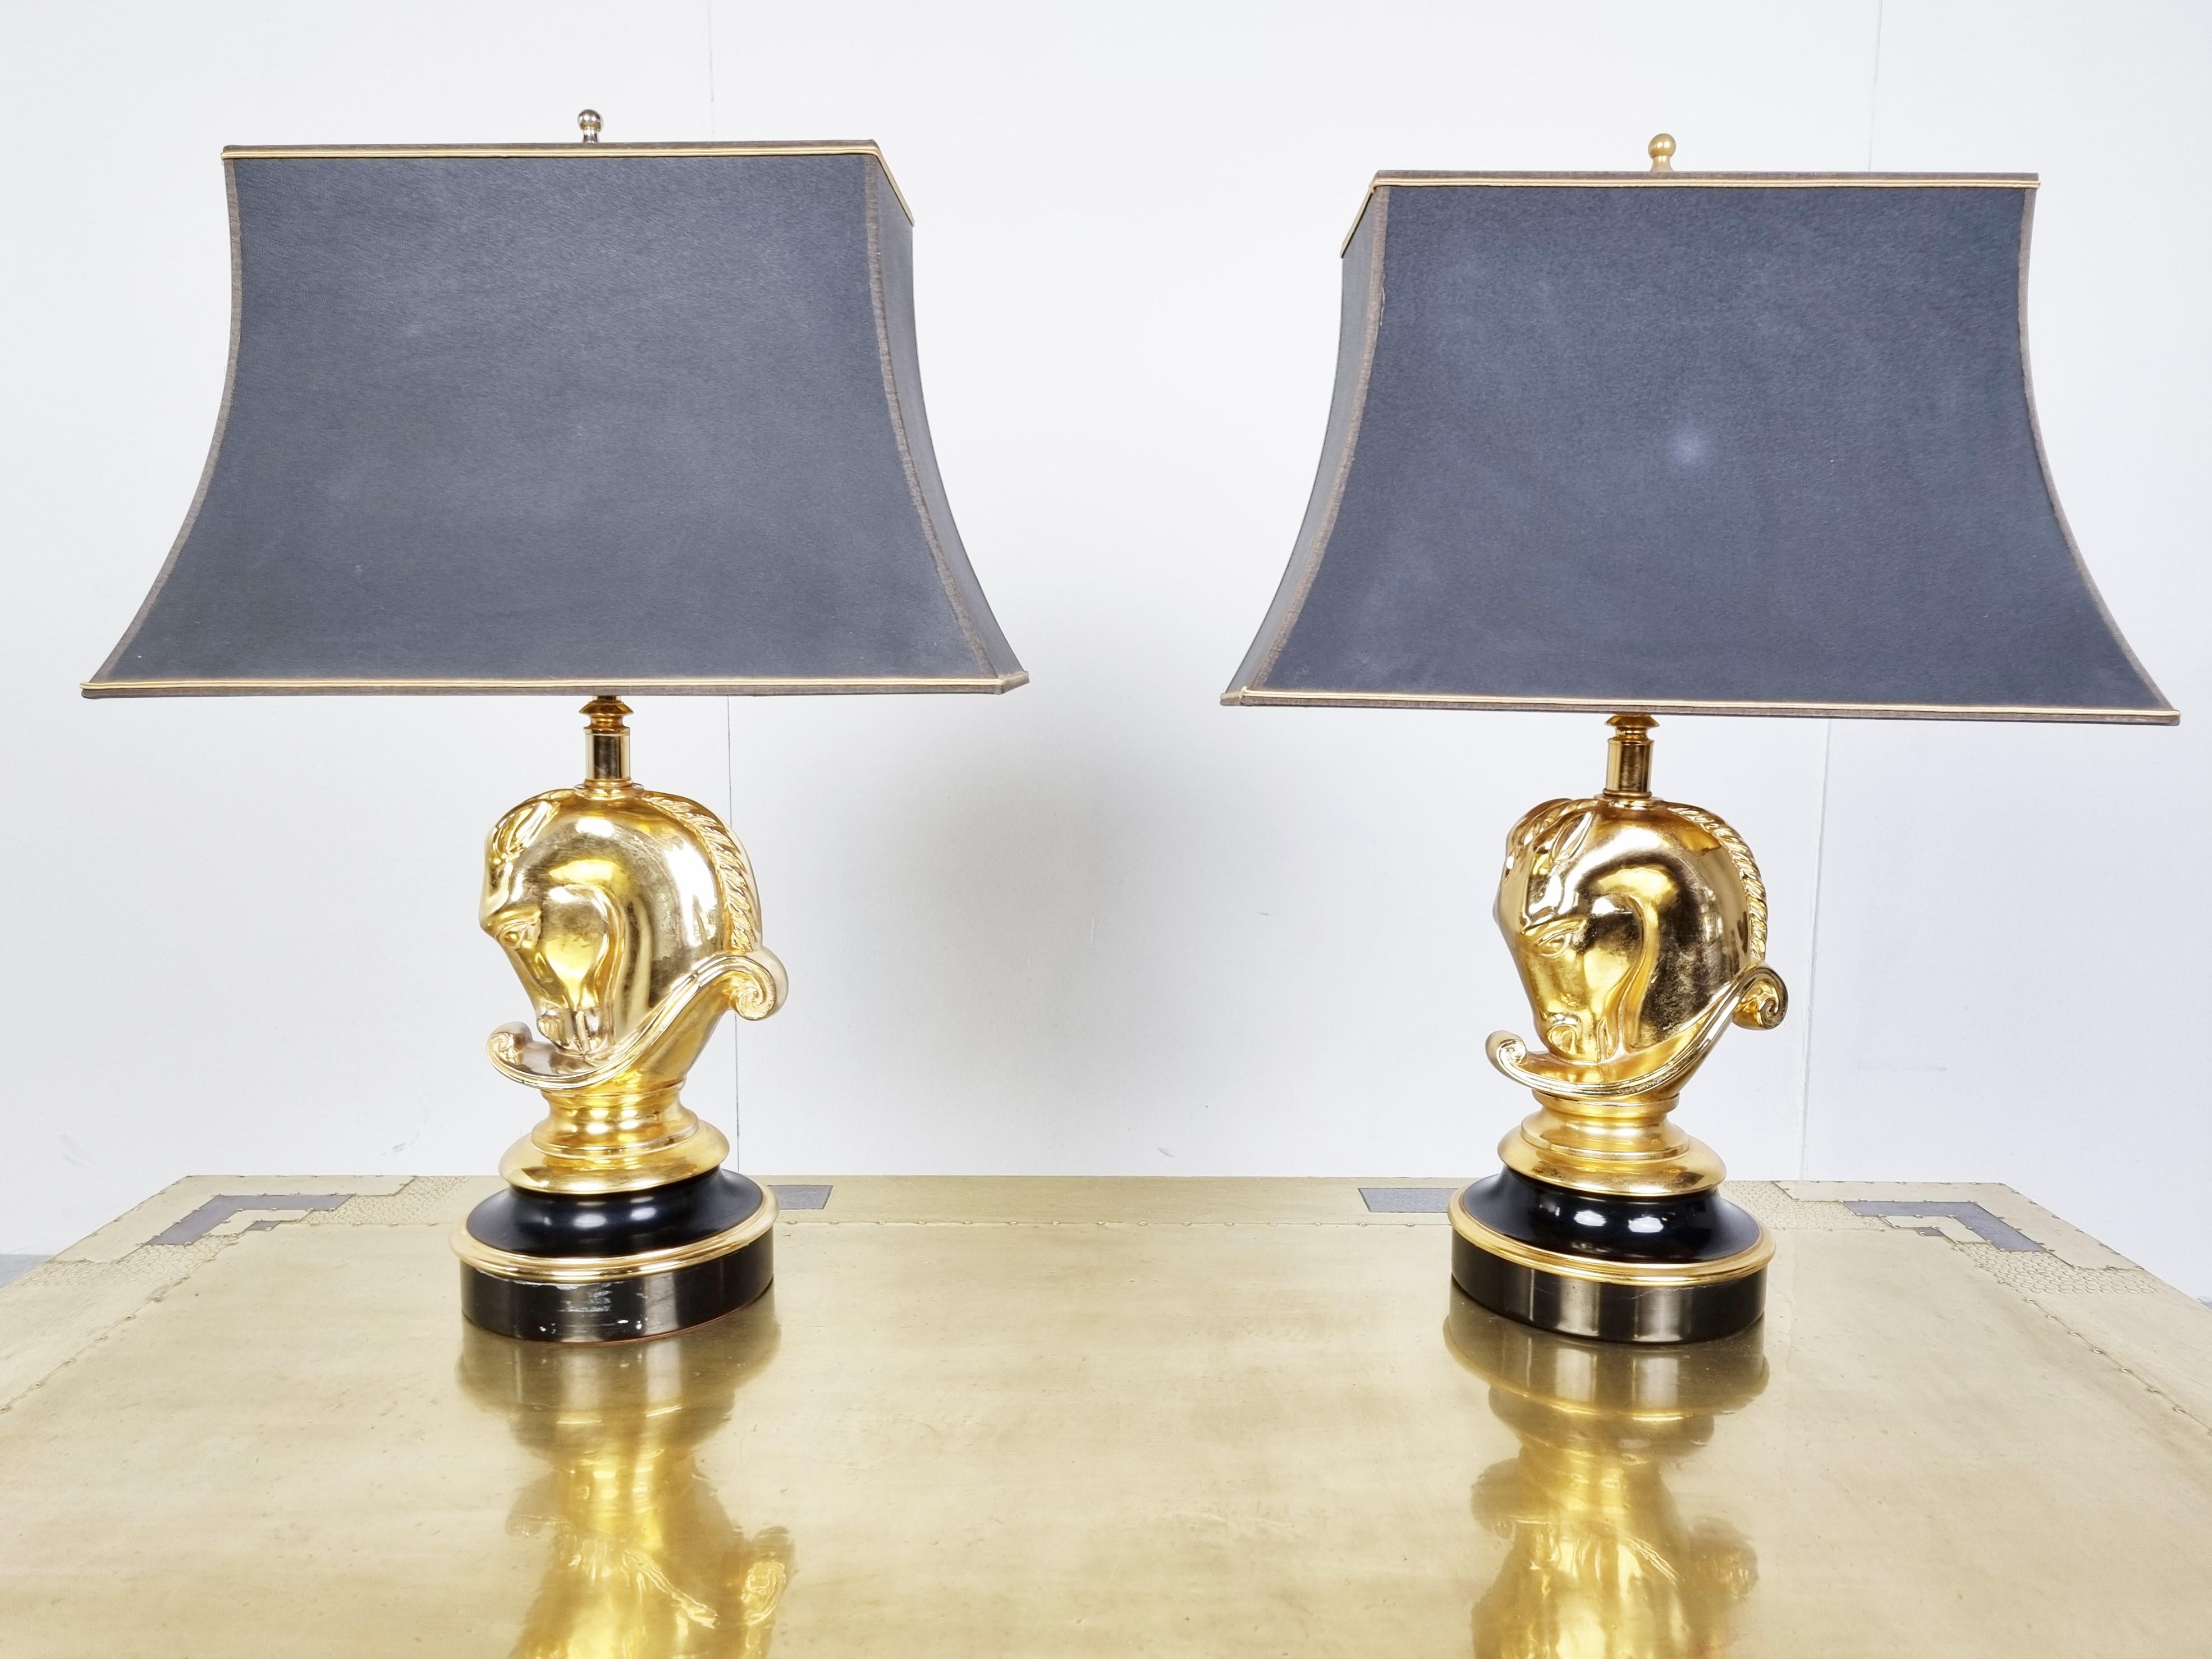 Pair of Brass Horse Head Table Lamps, 1970s Belgium For Sale 3